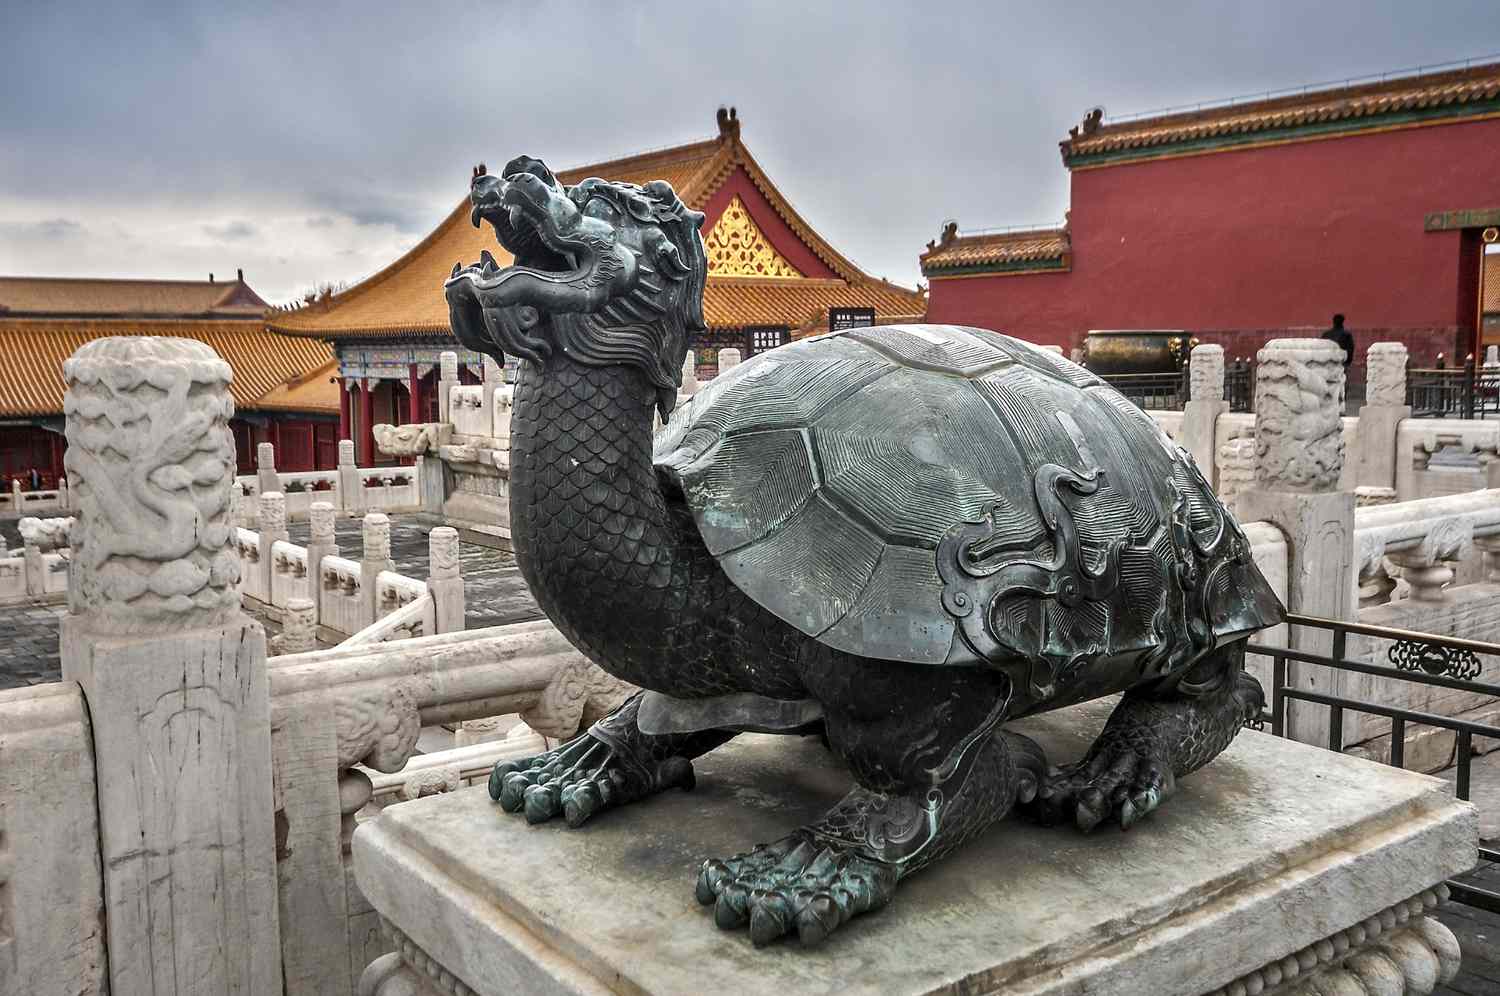 Dragon Turtle at Beijing Imperial Palace